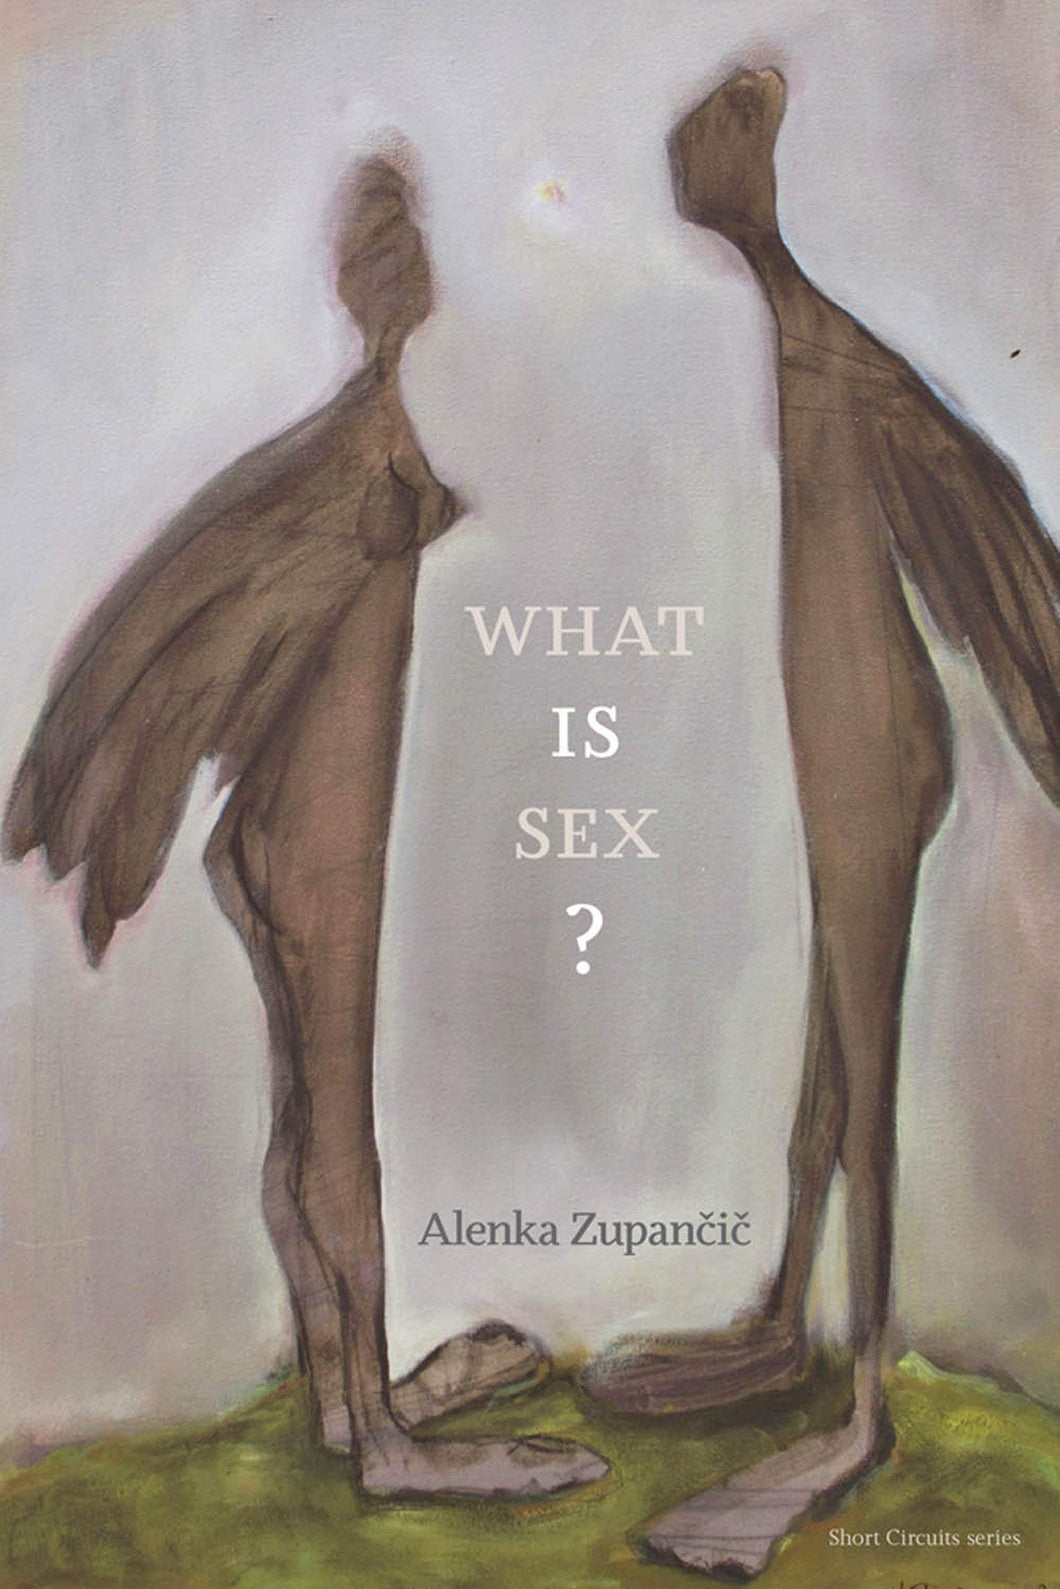 What IS Sex? (Short Circuits) by Alenka Zupancic